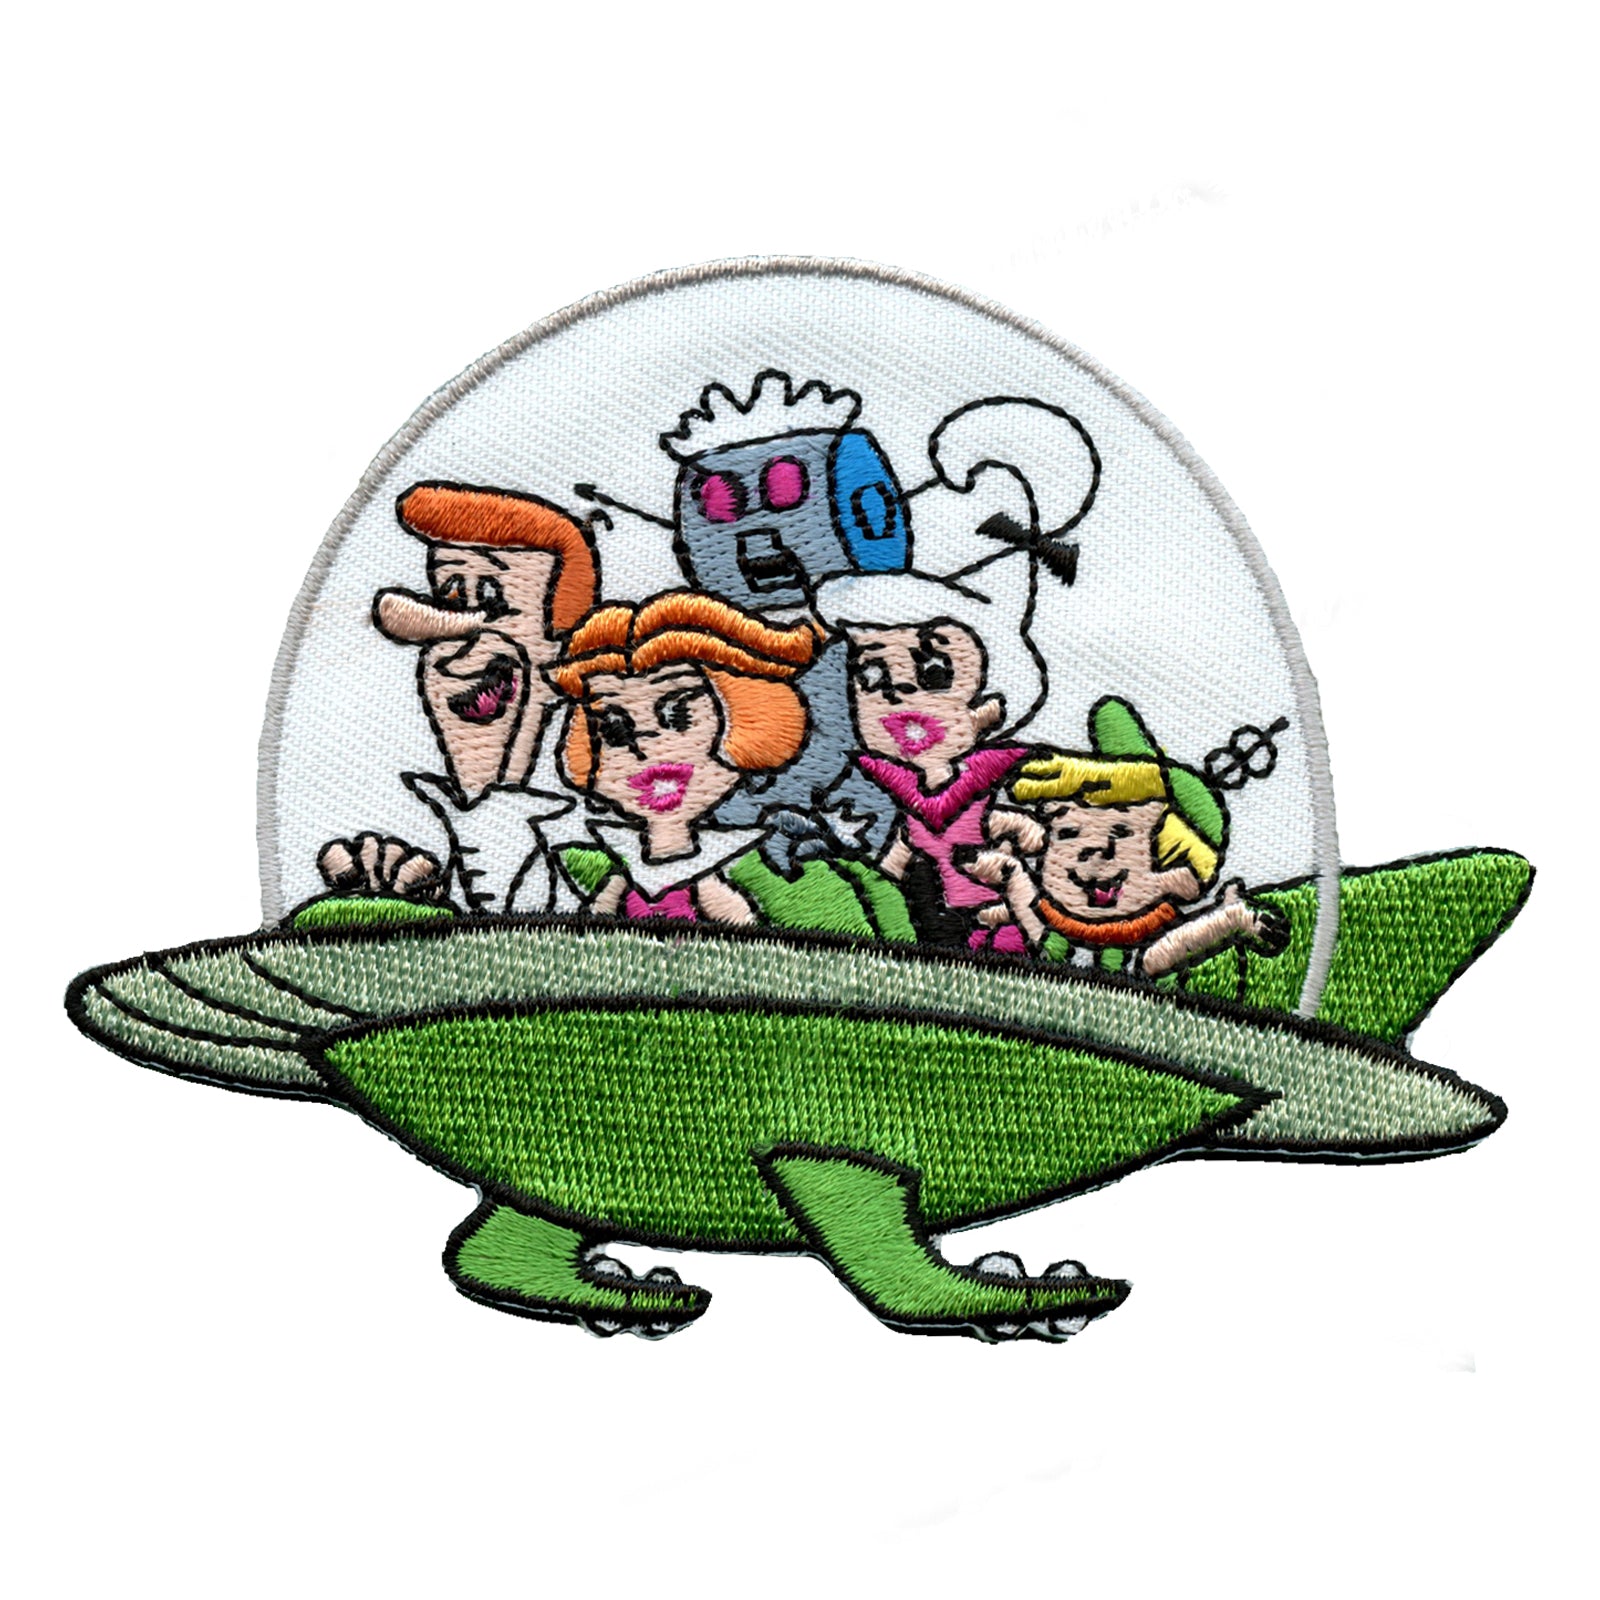 Officially Licensed The Jetsons All Characters In Ship Embroidered Iron On Patch 